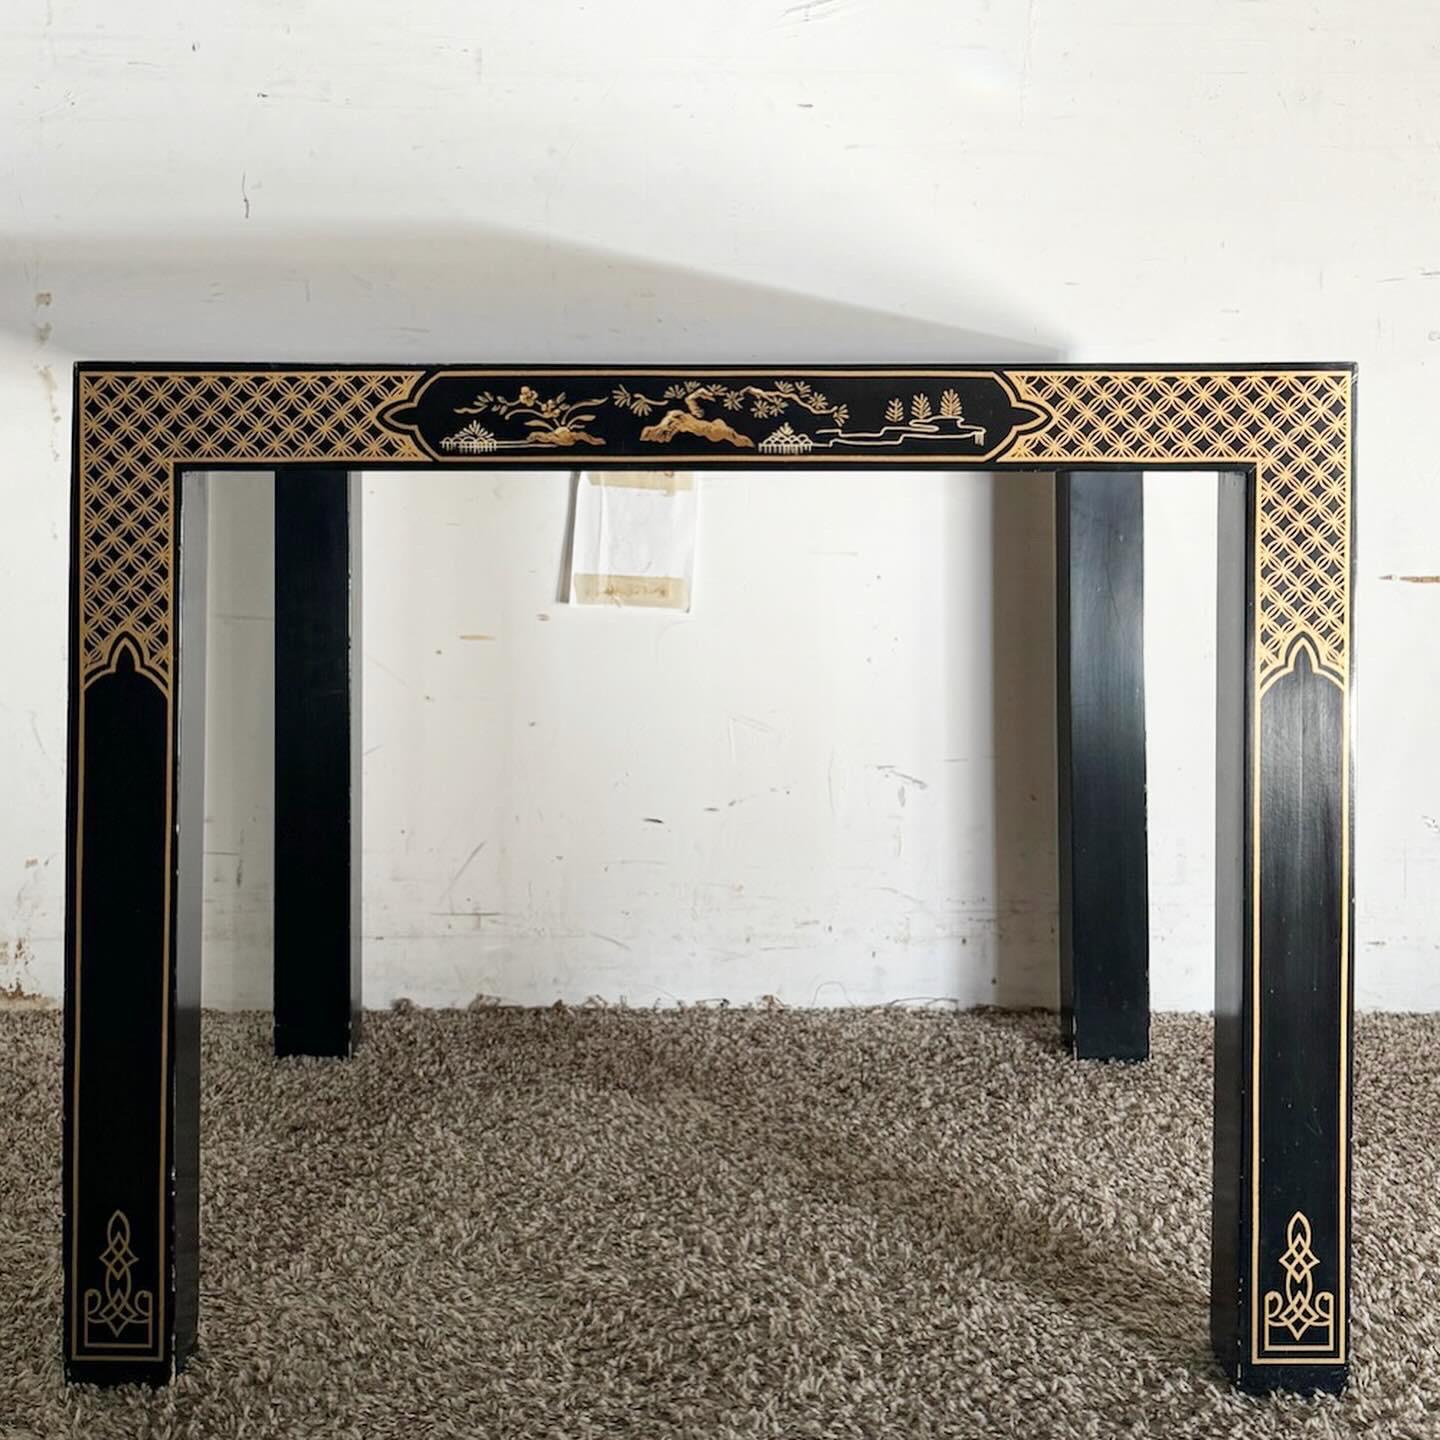 Discover the artistry of the Chinoiserie Hand Painted Side Table by Drexel Heritage. This exquisite table features traditional Asian motifs in detailed hand-painted designs, embodying the elegance and craftsmanship of Drexel Heritage. It's not just